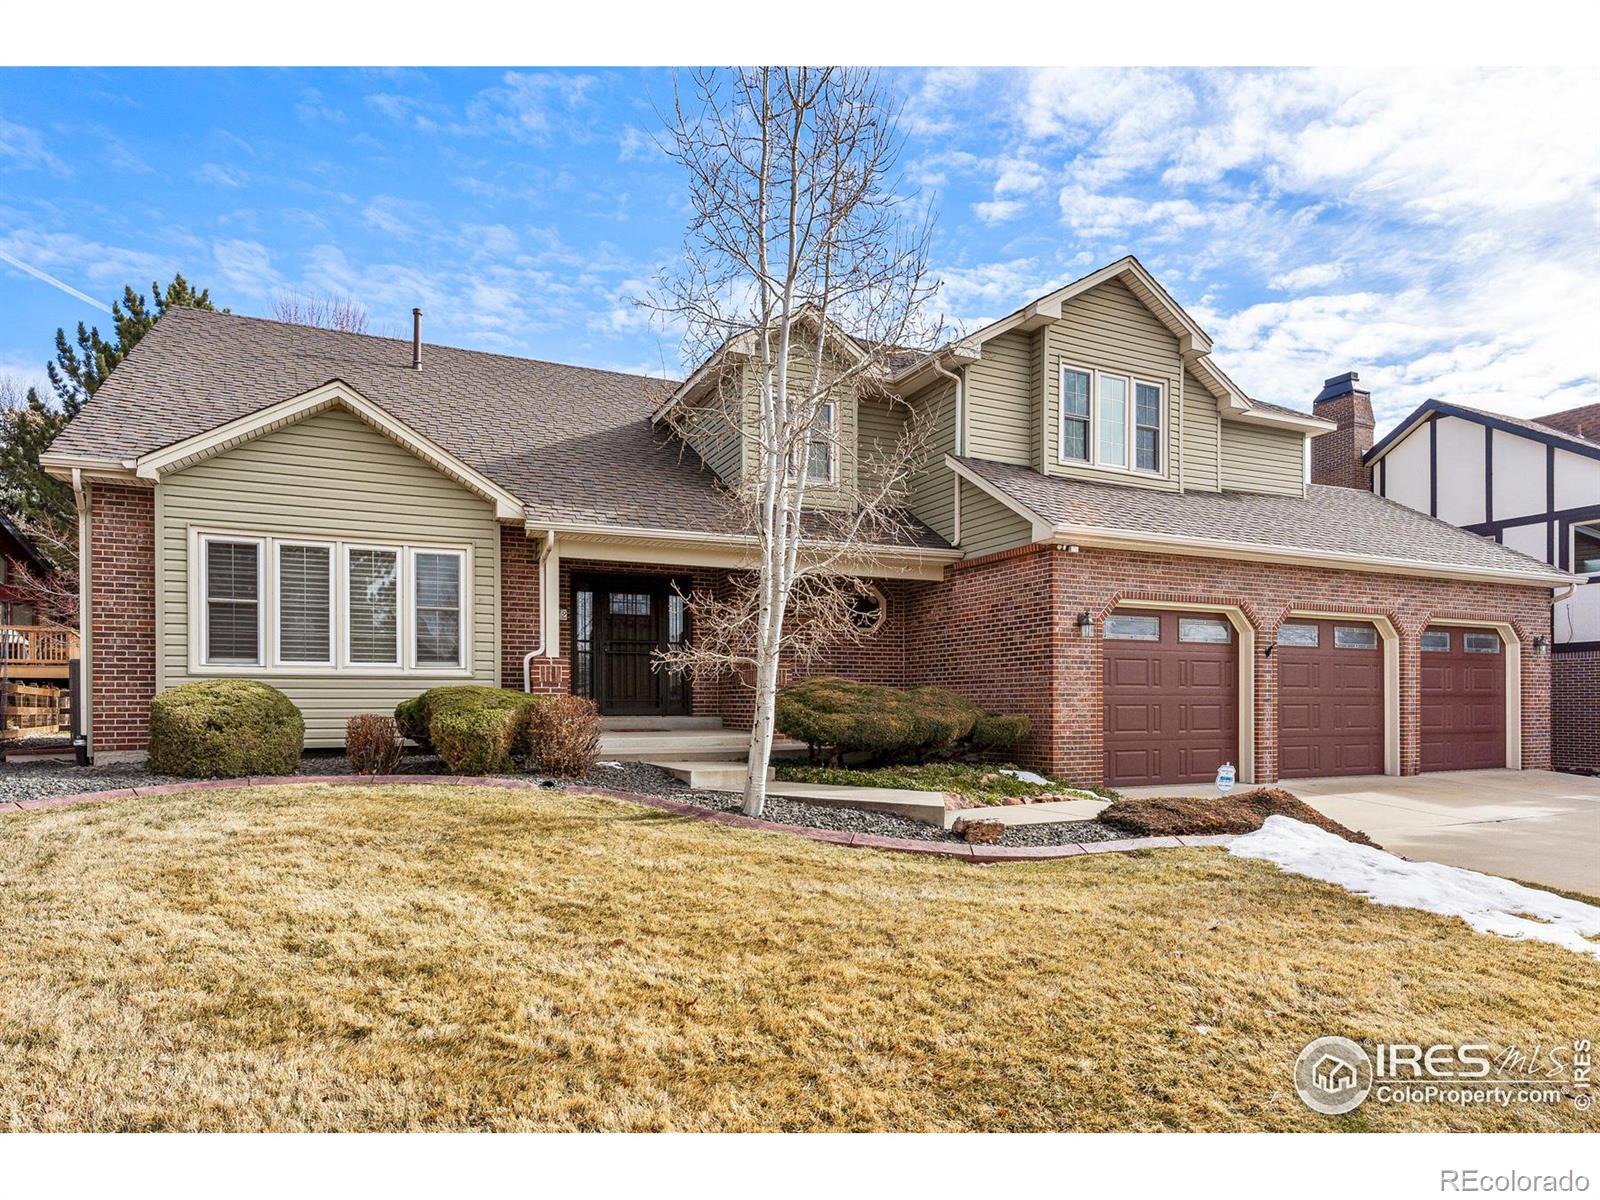 1272  Clubhouse Drive, broomfield MLS: 4567891002446 Beds: 5 Baths: 4 Price: $830,000